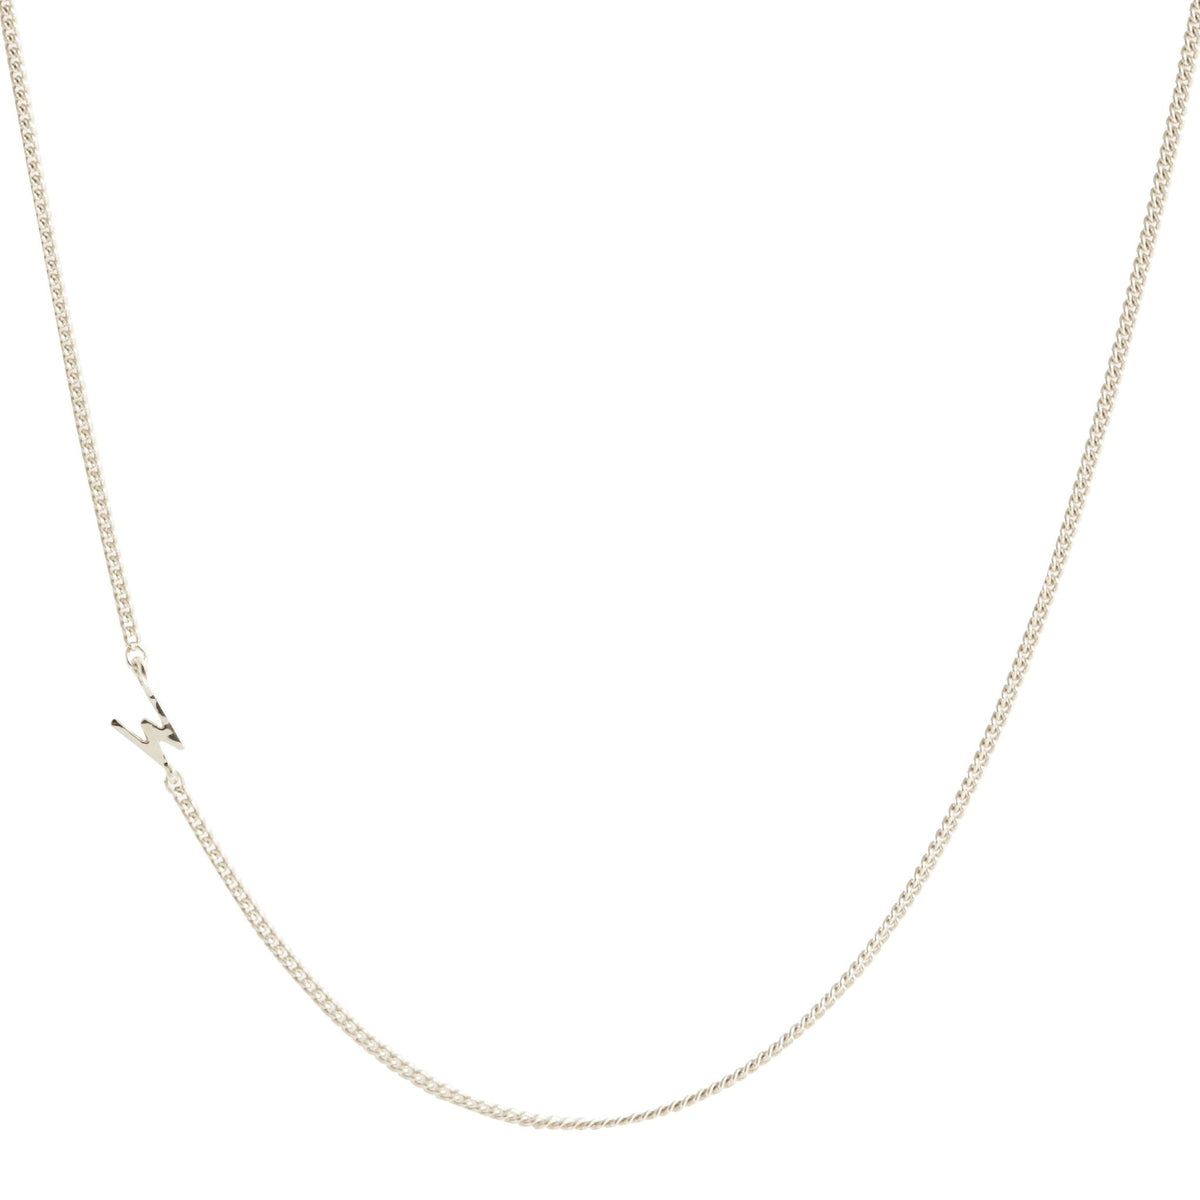 NOTABLE OFFSET INITIAL NECKLACE - W - GOLD, ROSE GOLD, OR SILVER - SO PRETTY CARA COTTER